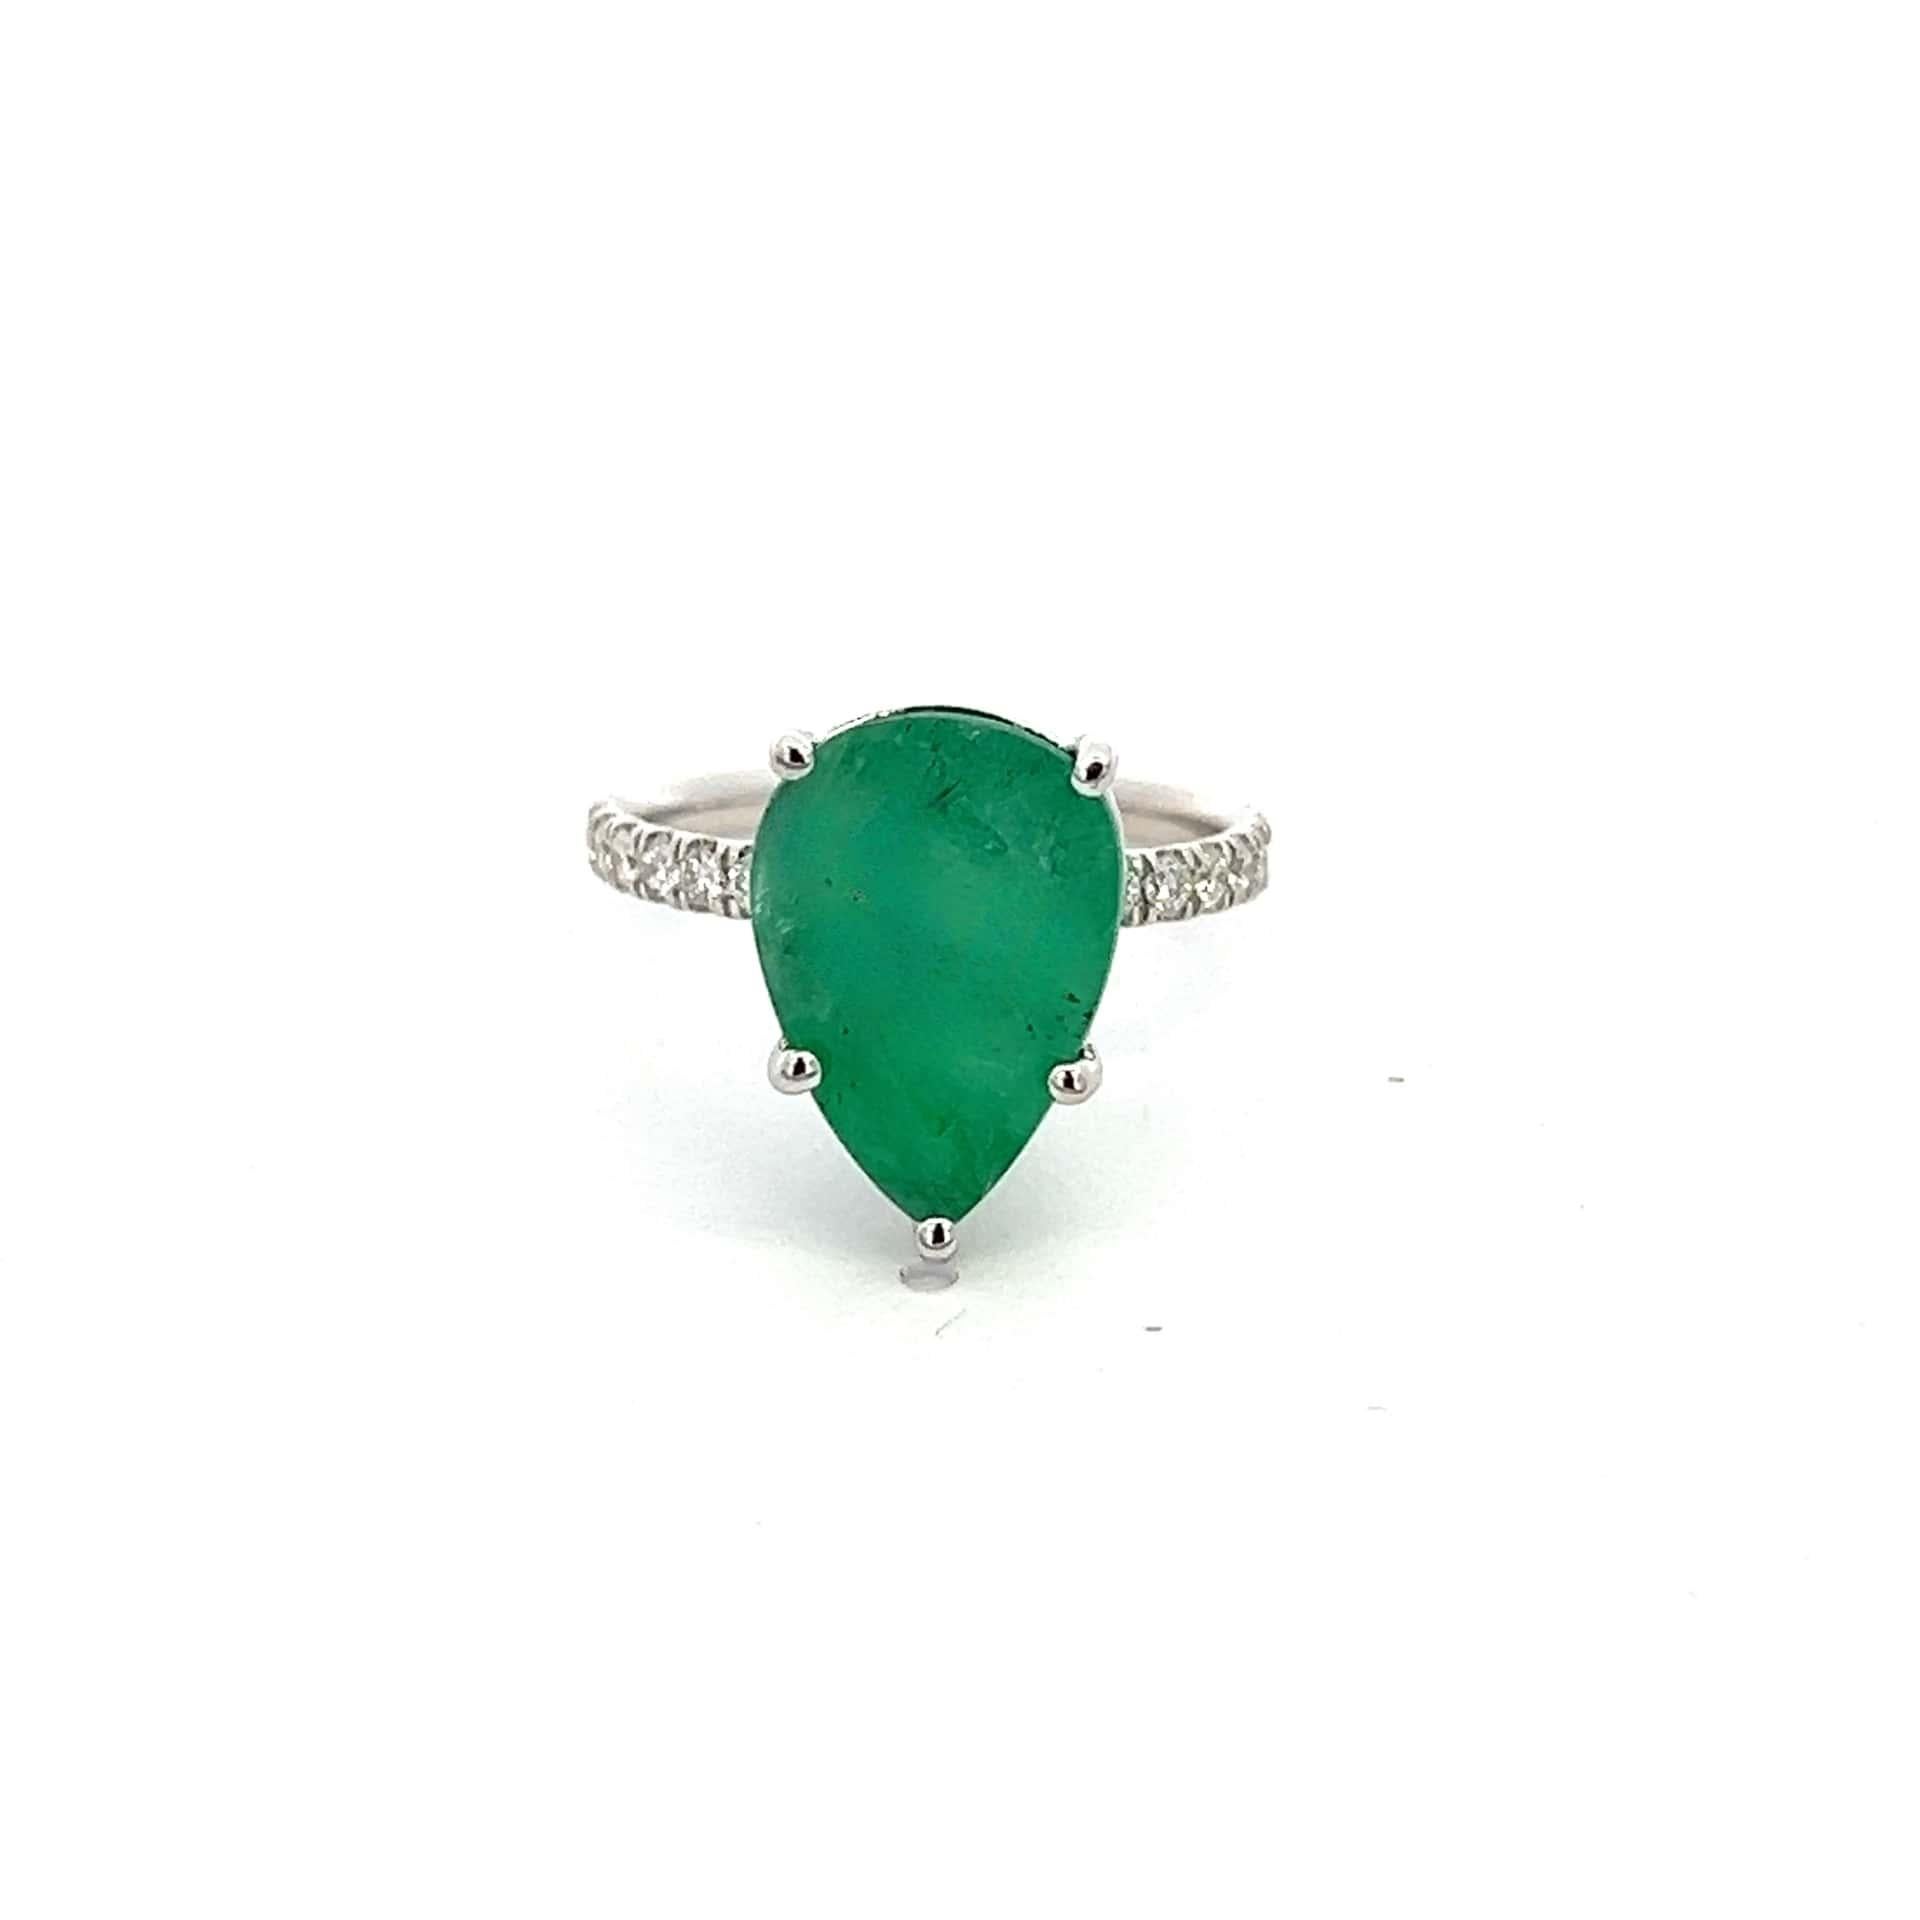 Natural Emerald Diamond Ring 6.5 14k WG 4.62 TCW Certified For Sale